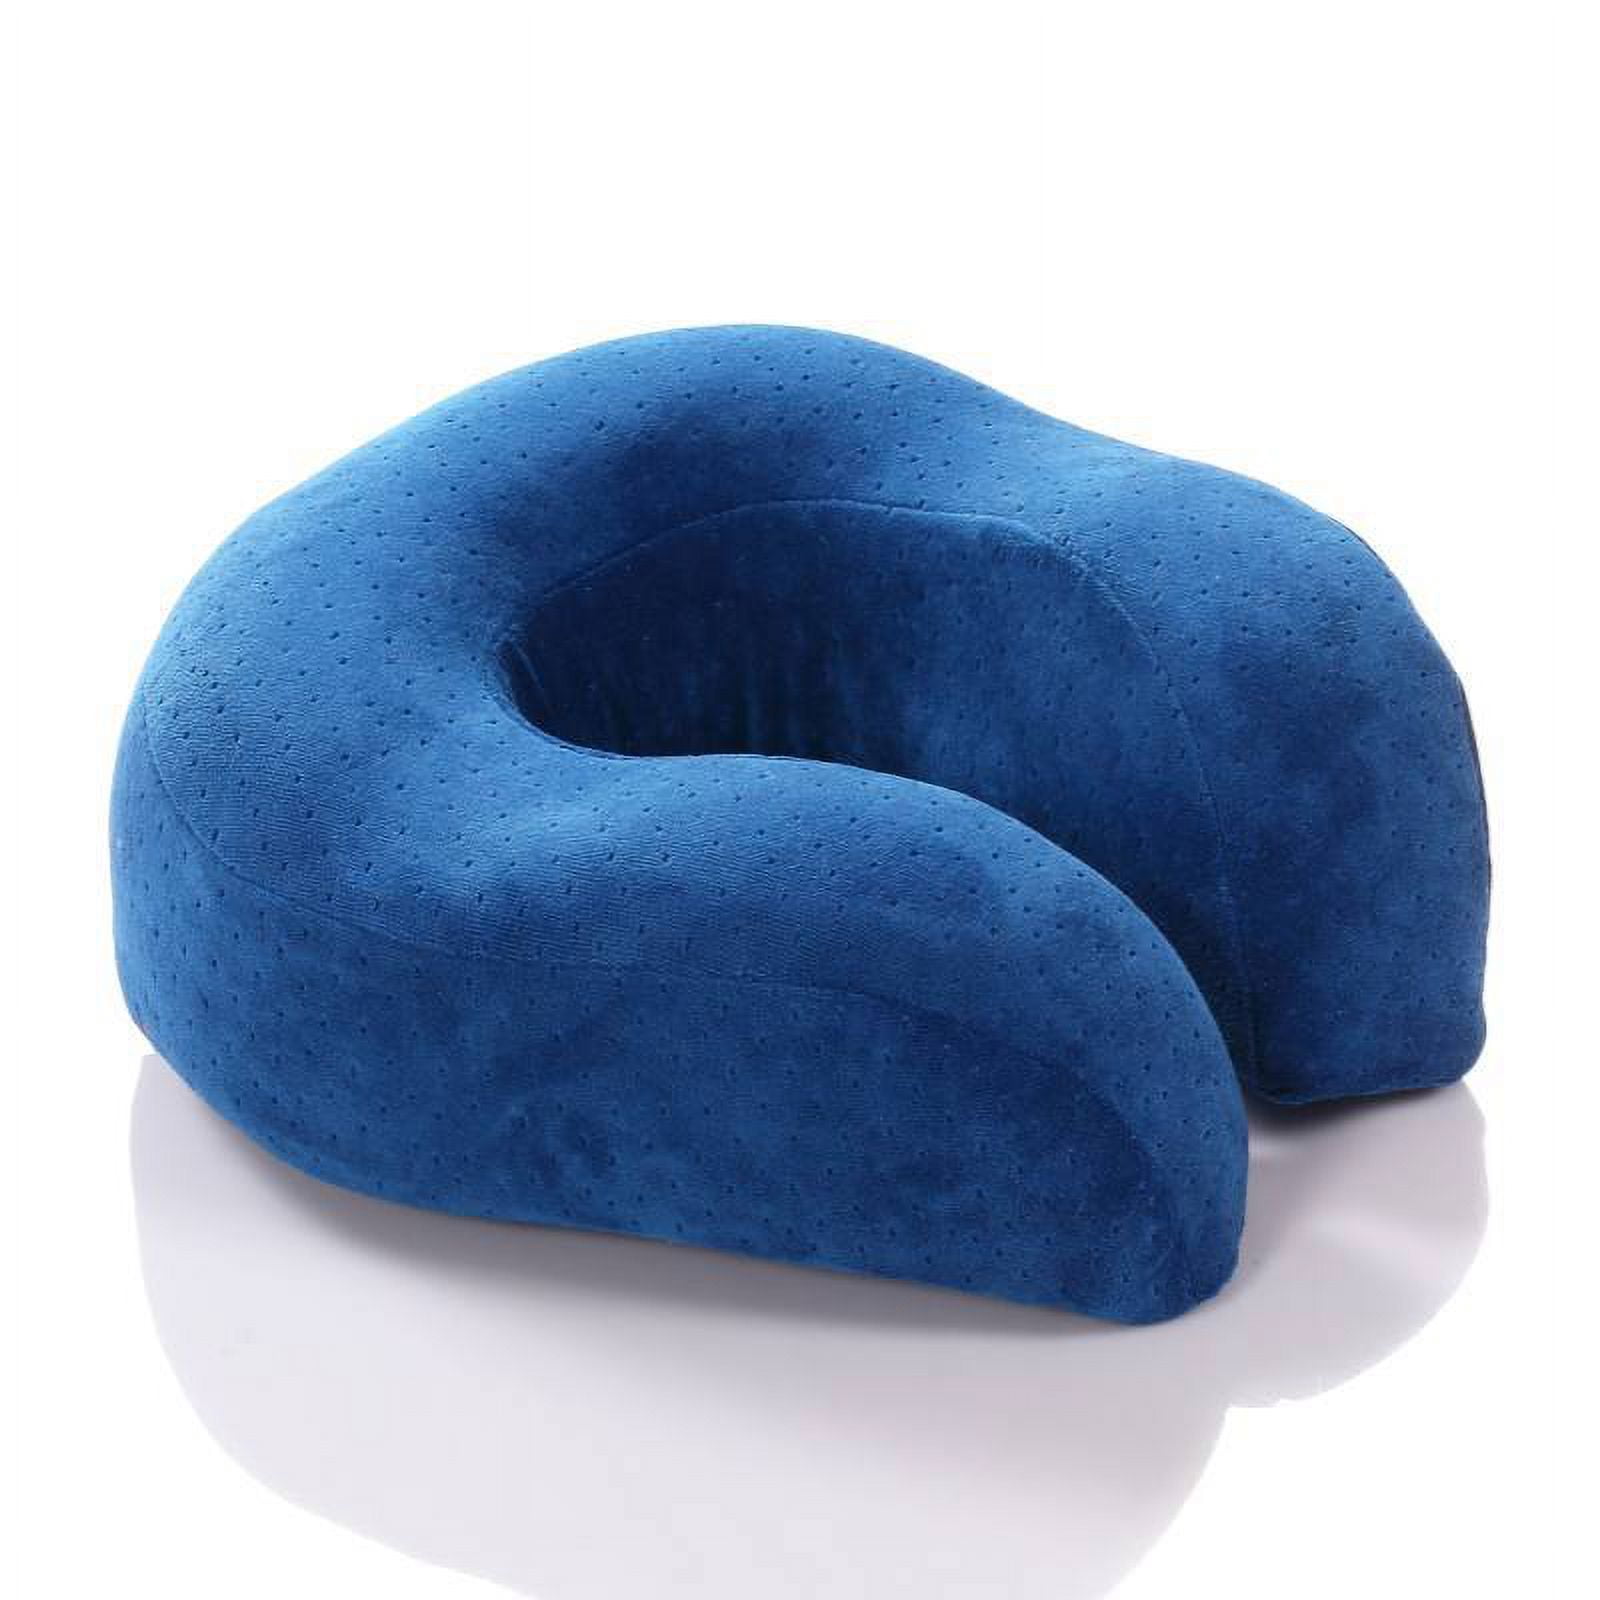 Foot Rest Pillow For Travel Travel Essentials Ultra Light Foldable  Convenient For Airplane Train For Car For Travel Business PVC Casual Unisex  Travel Accessories